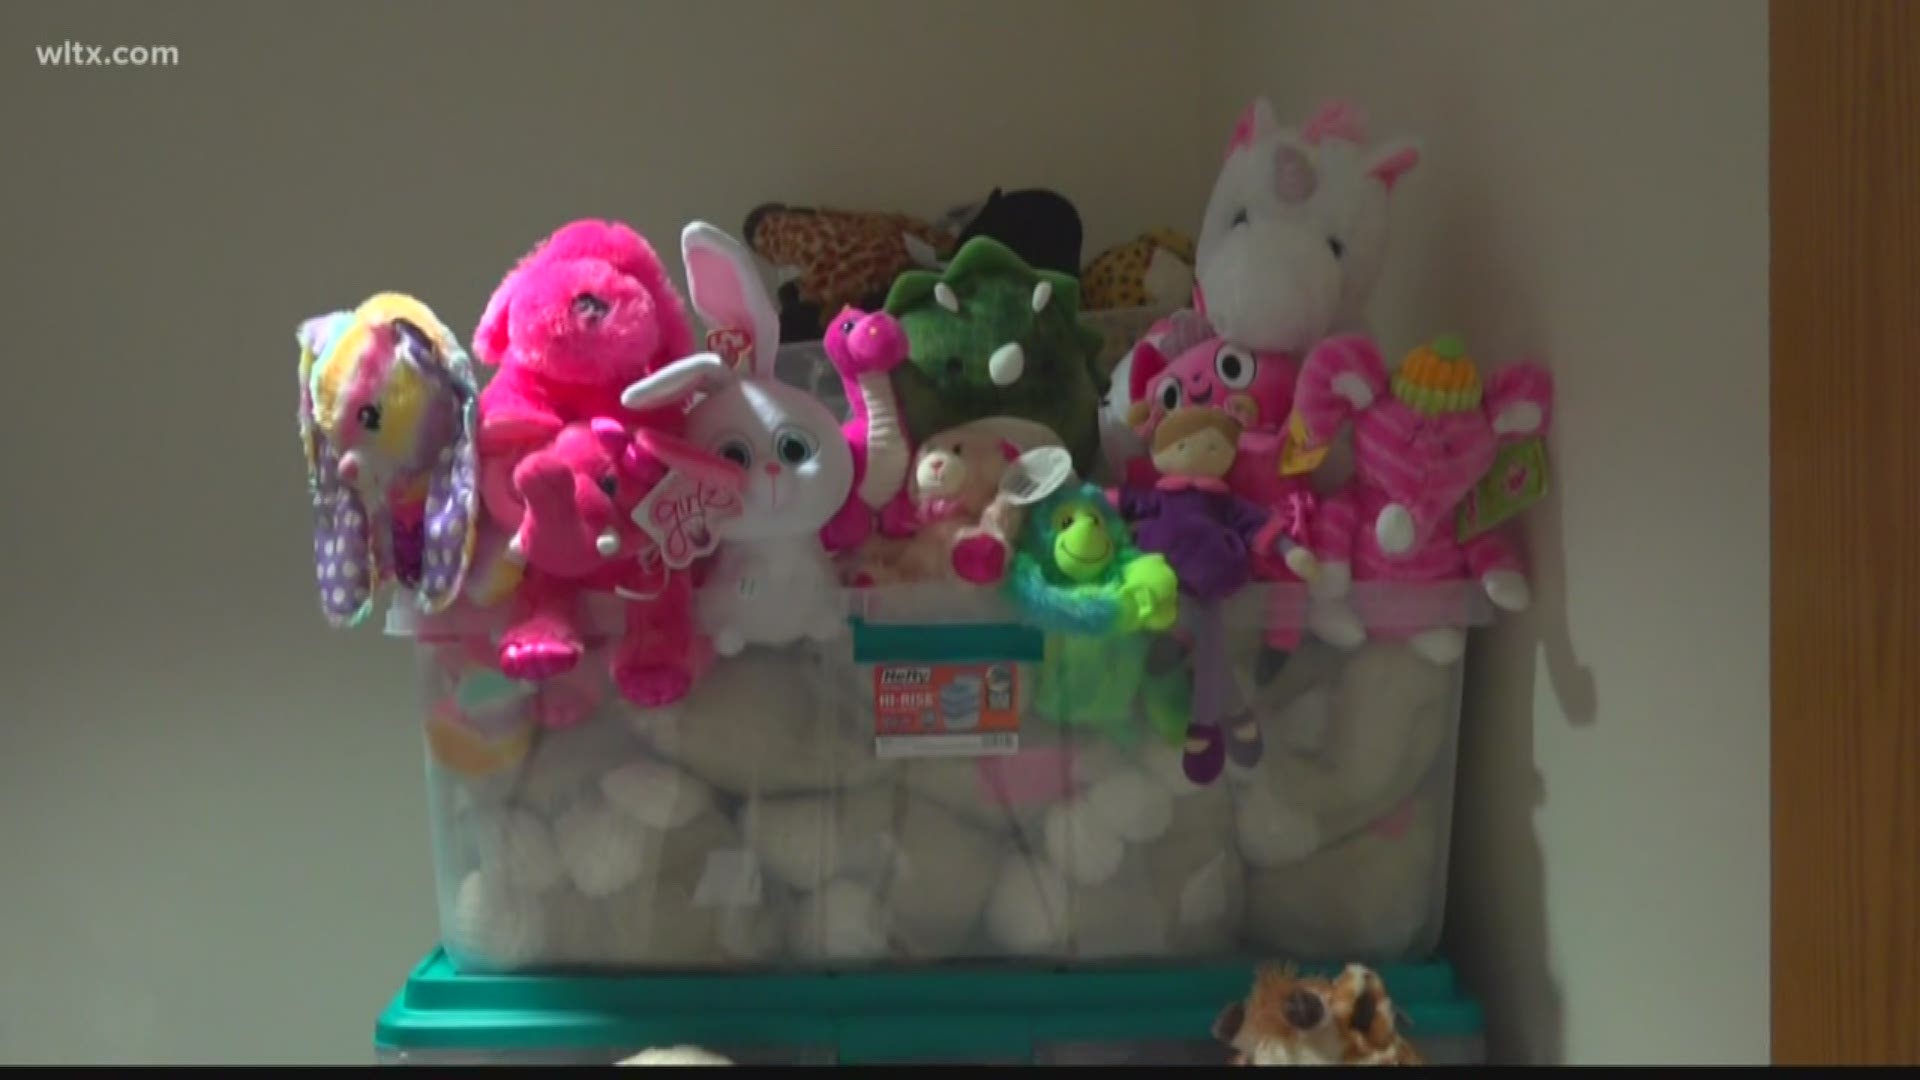 In Faye's memory, the stuffed animals from her memorial, will go to children at the hospital to help them get through treatment and feel more comfortable